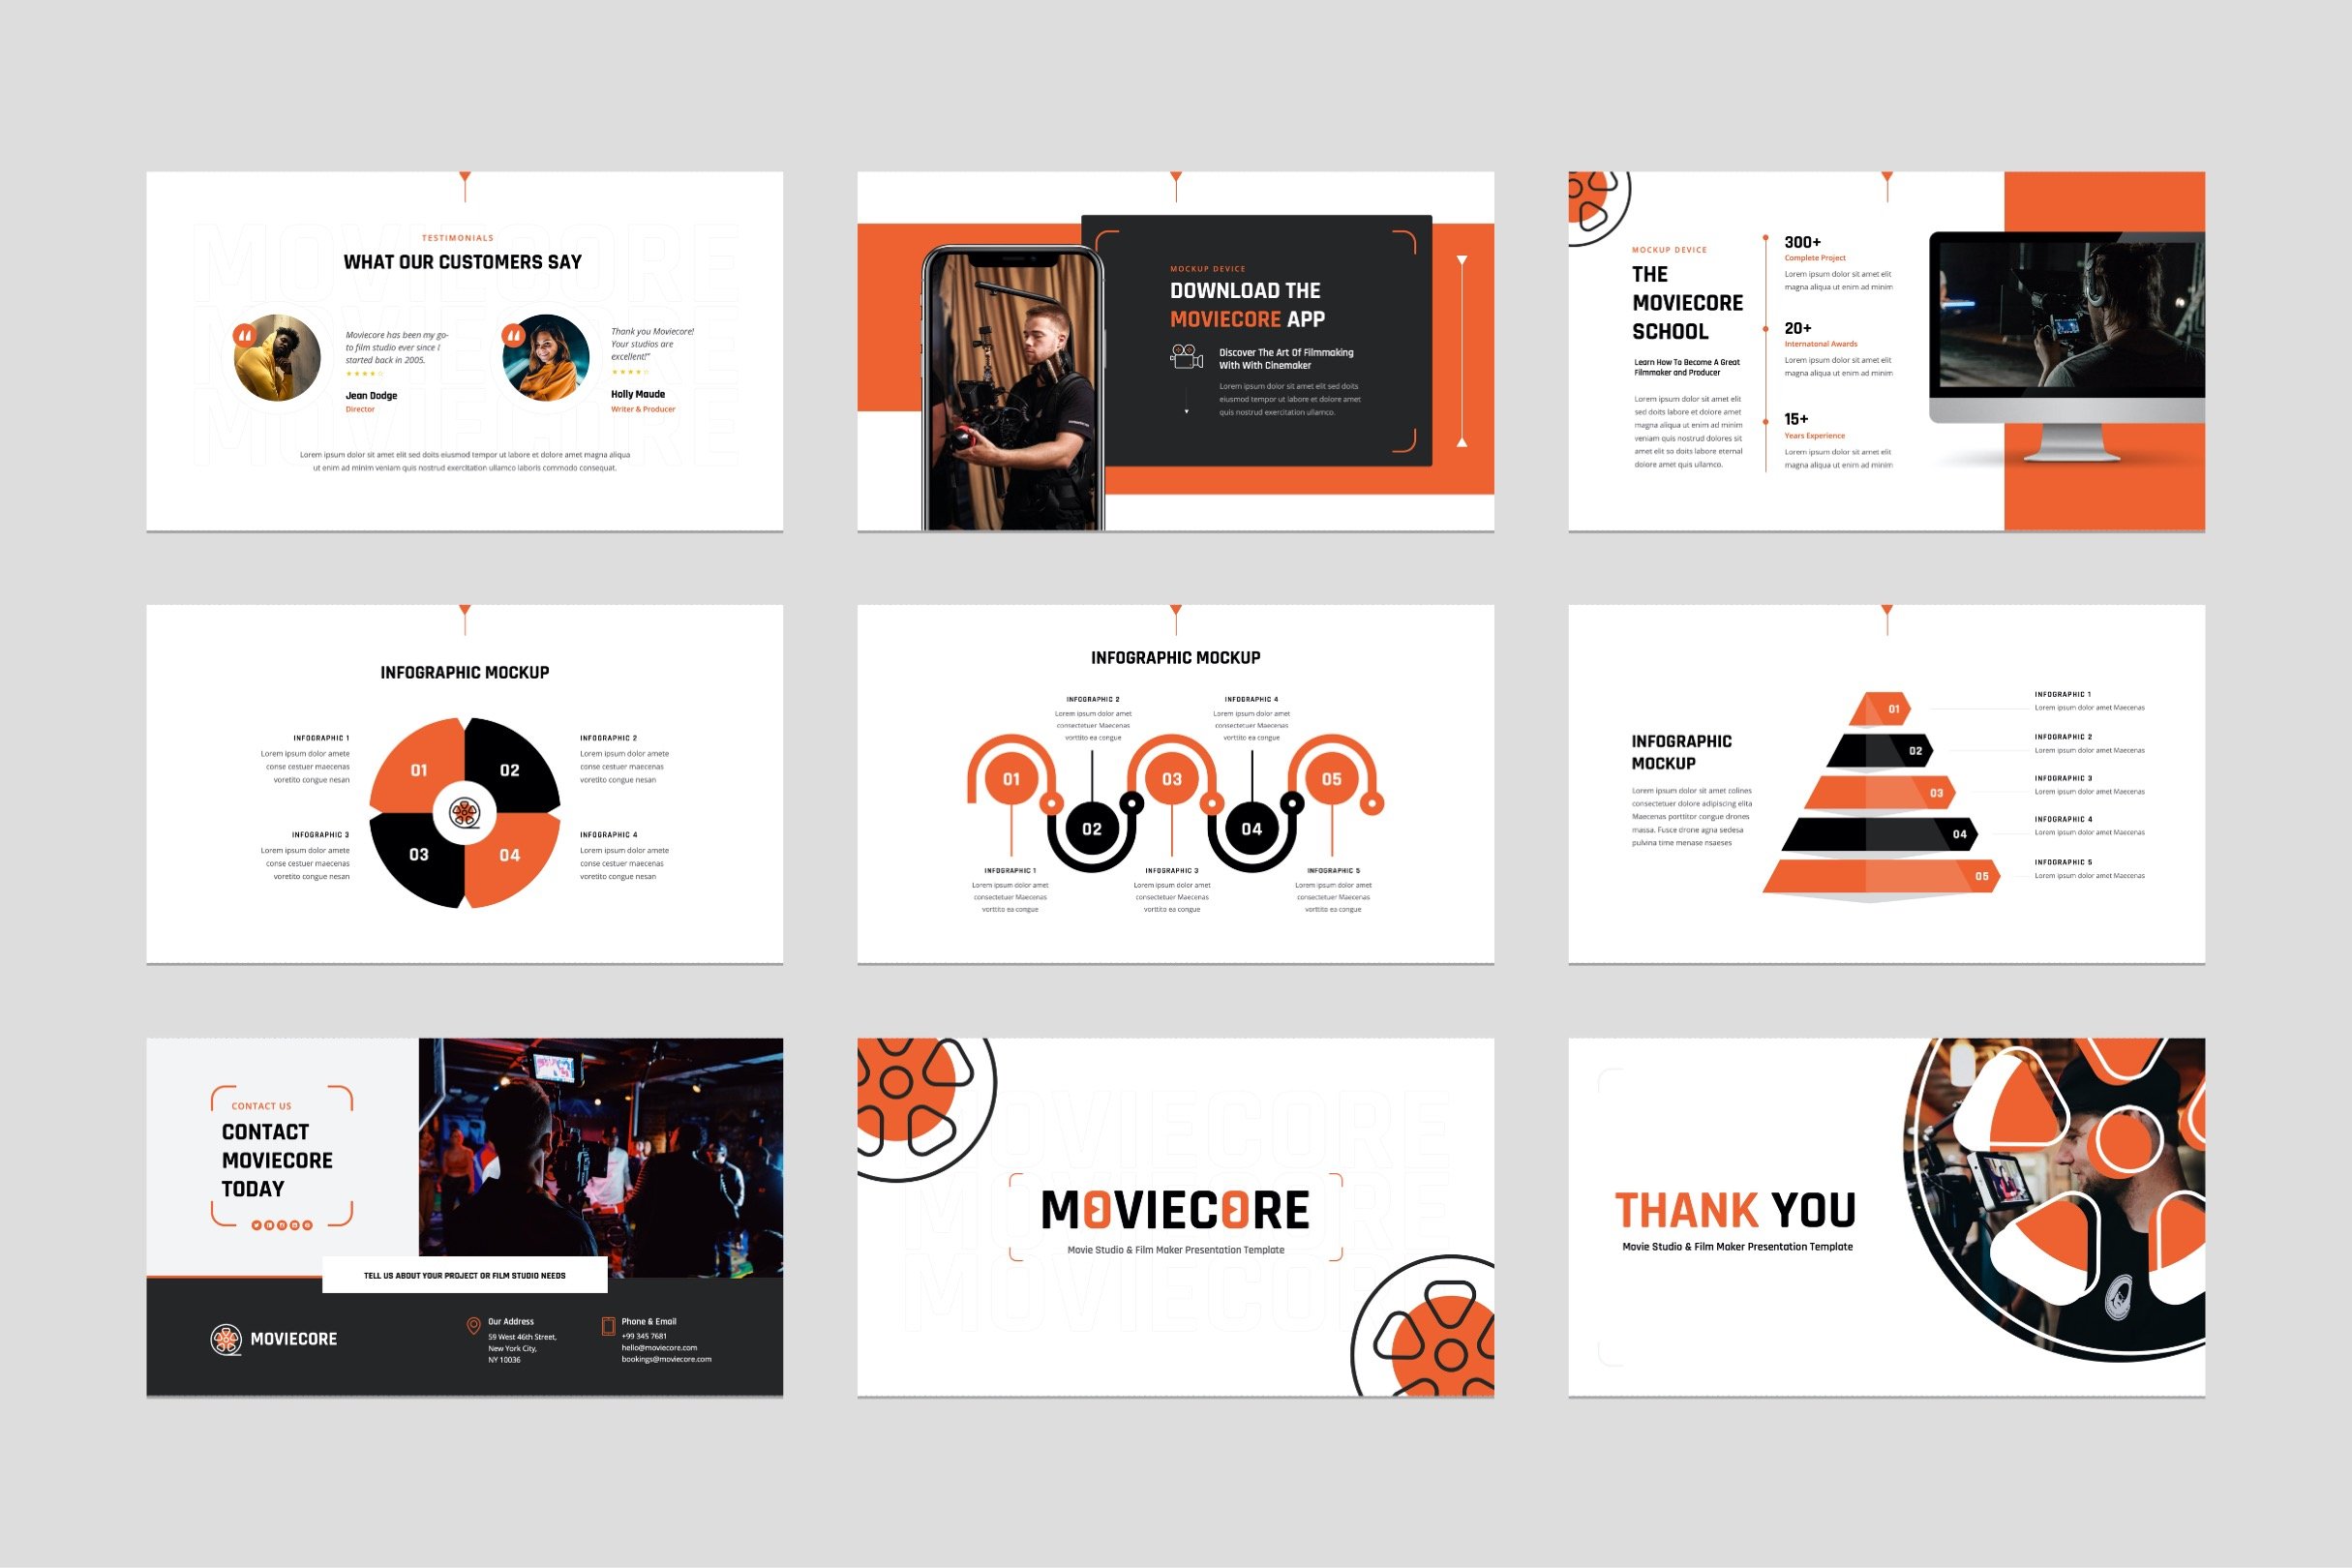 White template with an orange accents.